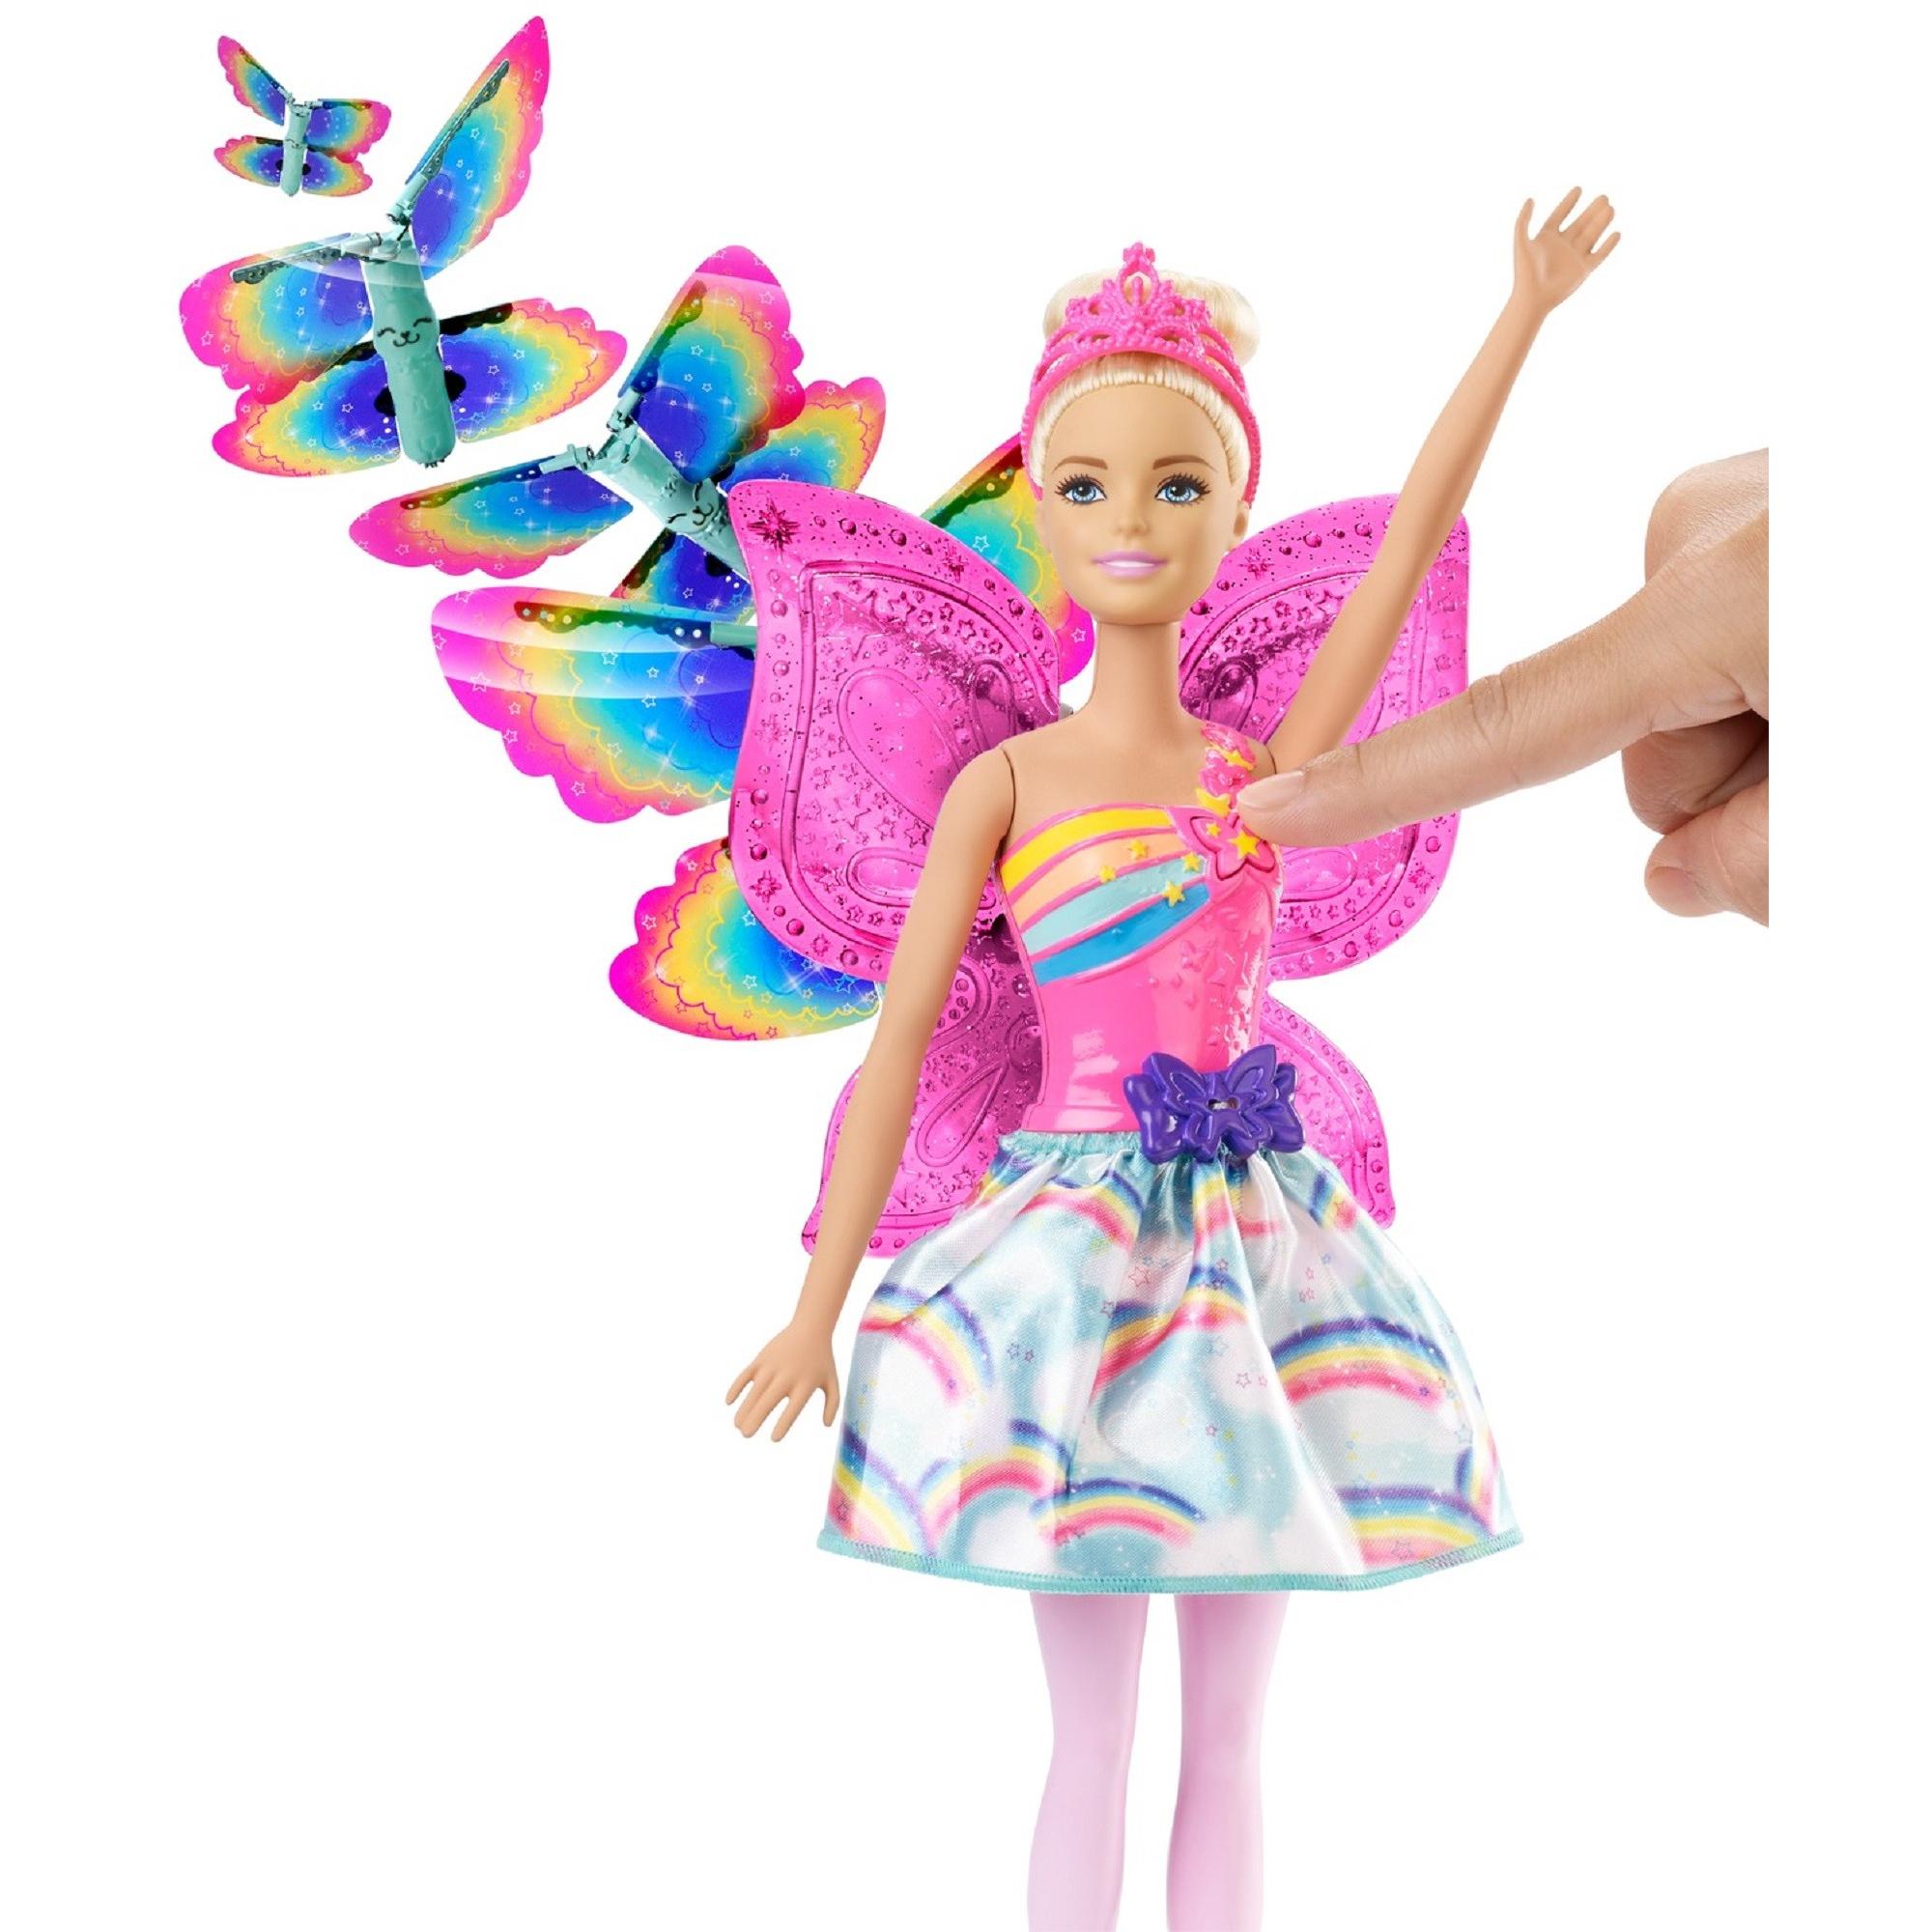 Barbie Dreamtopia Flying Wings Fairy Doll with Blonde Hair - image 6 of 11